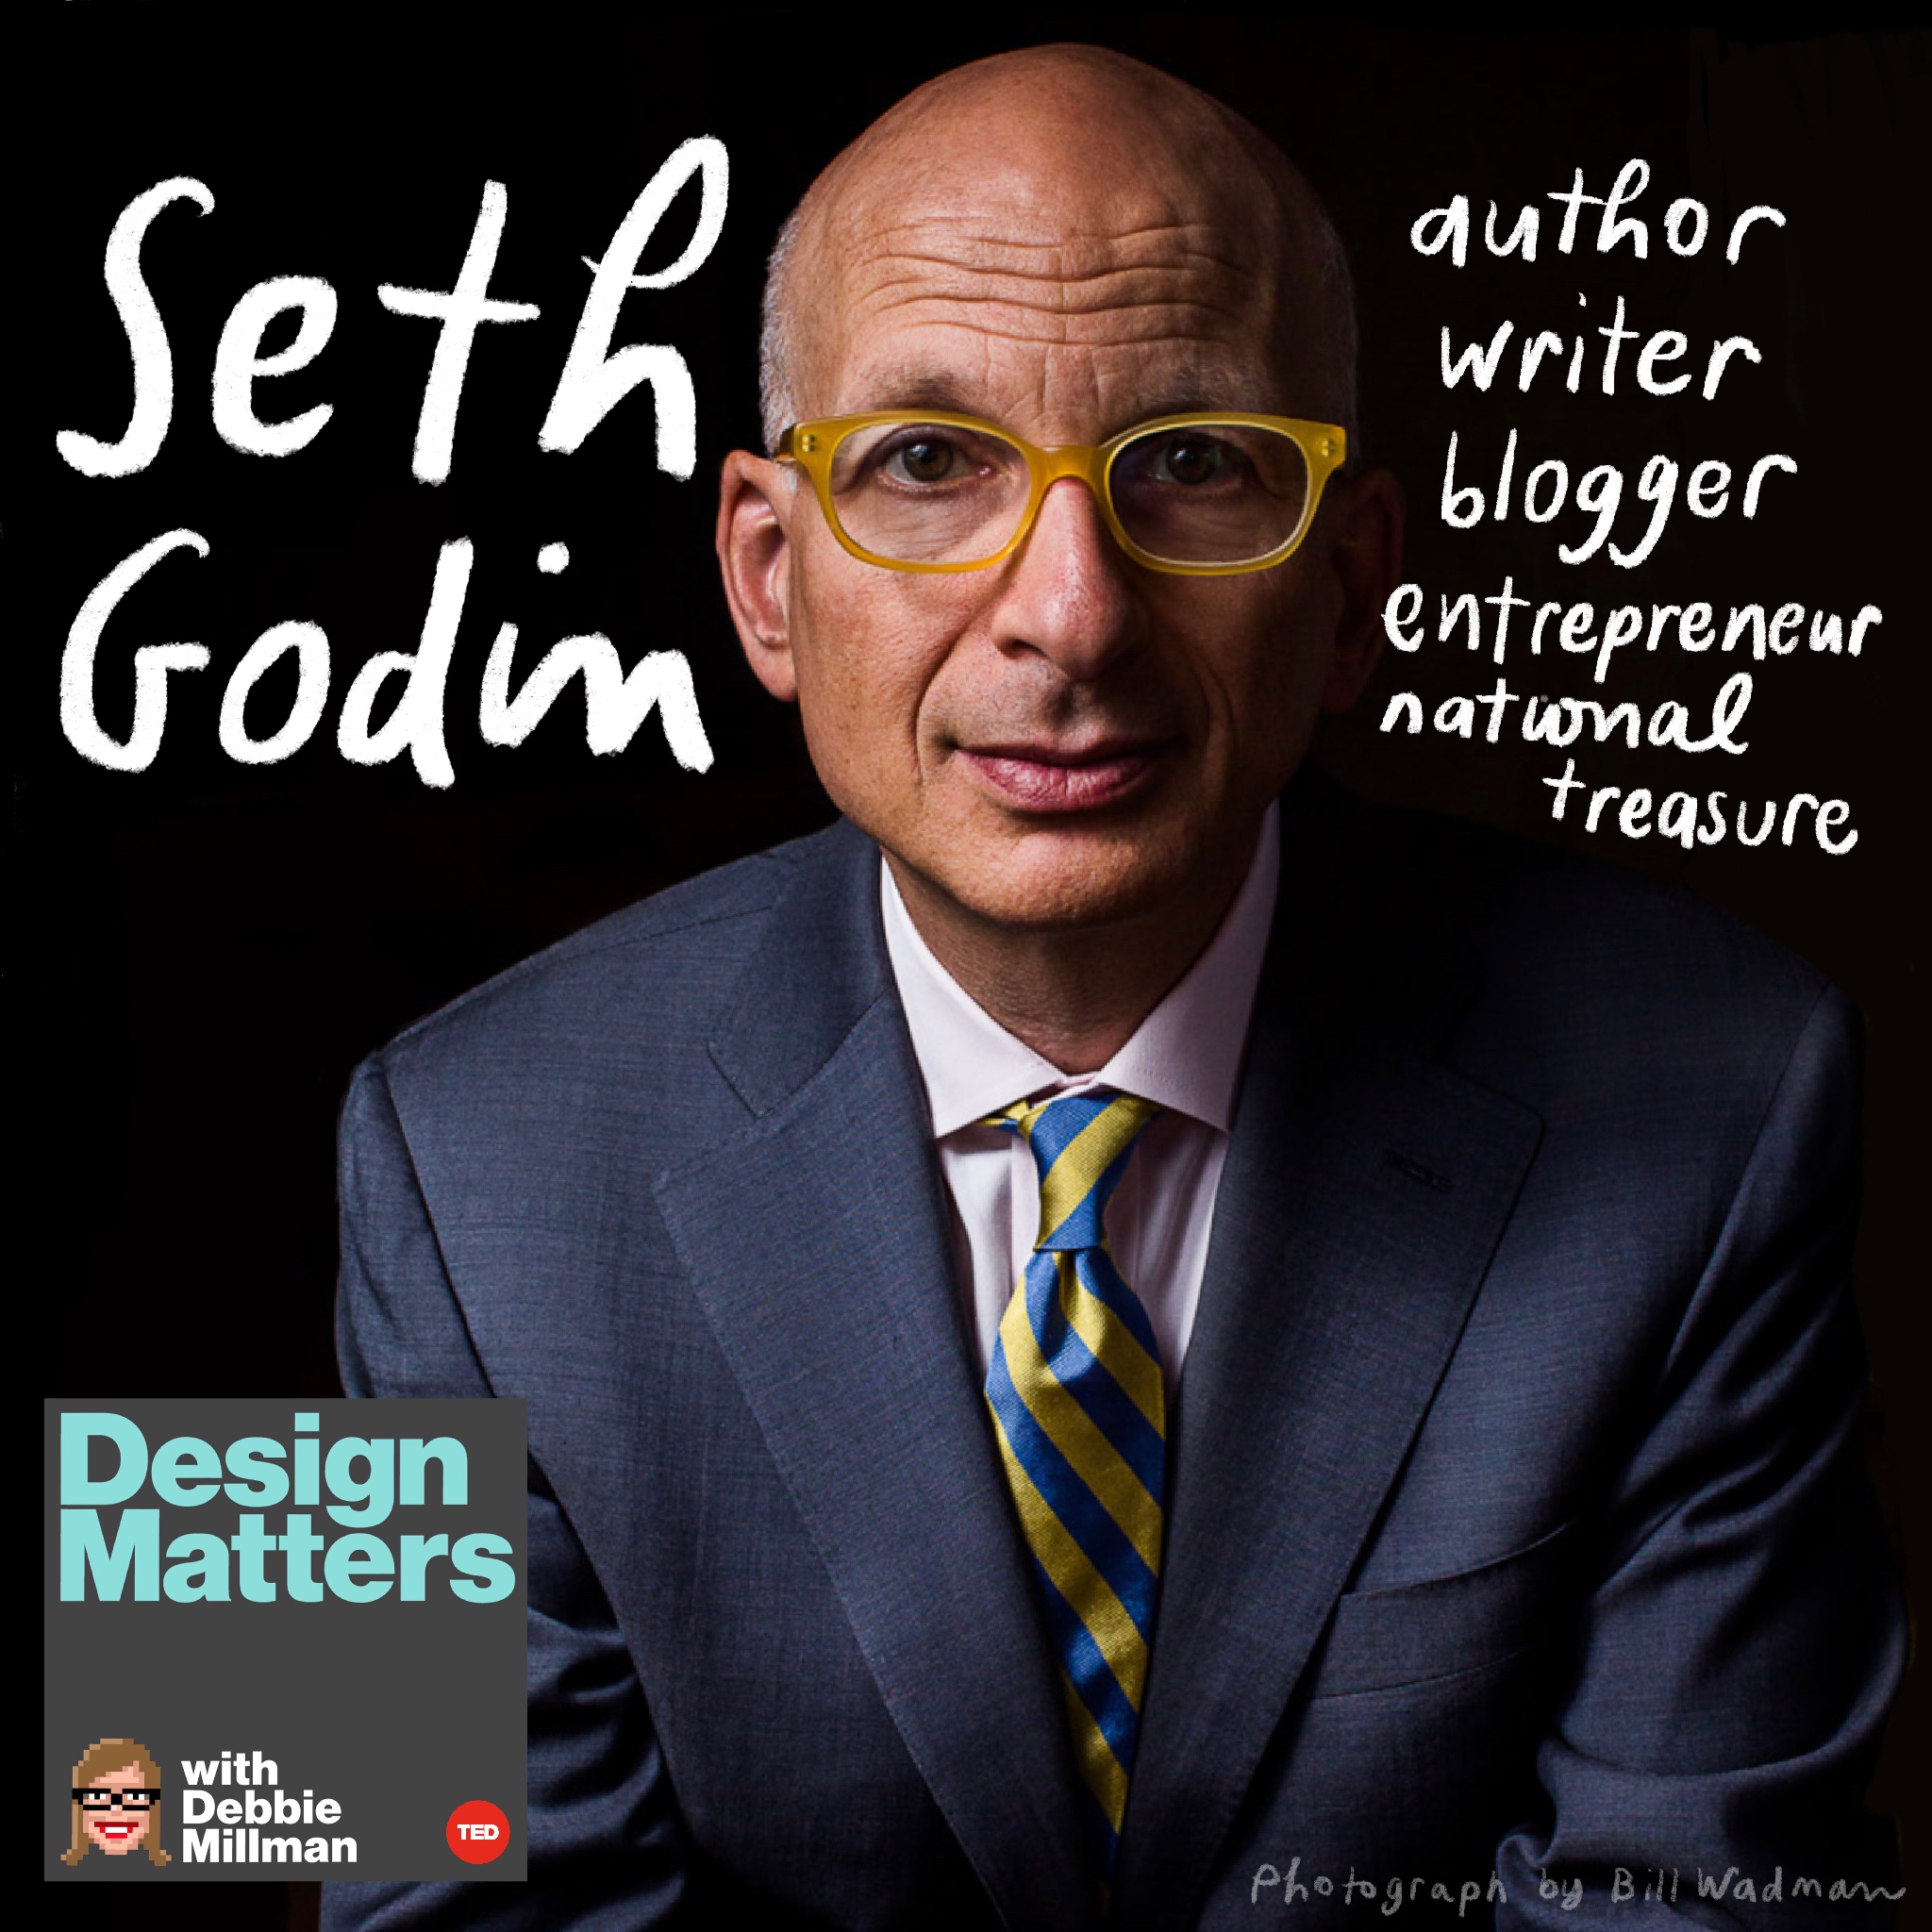 Design Matters From the Archive: Seth Godin